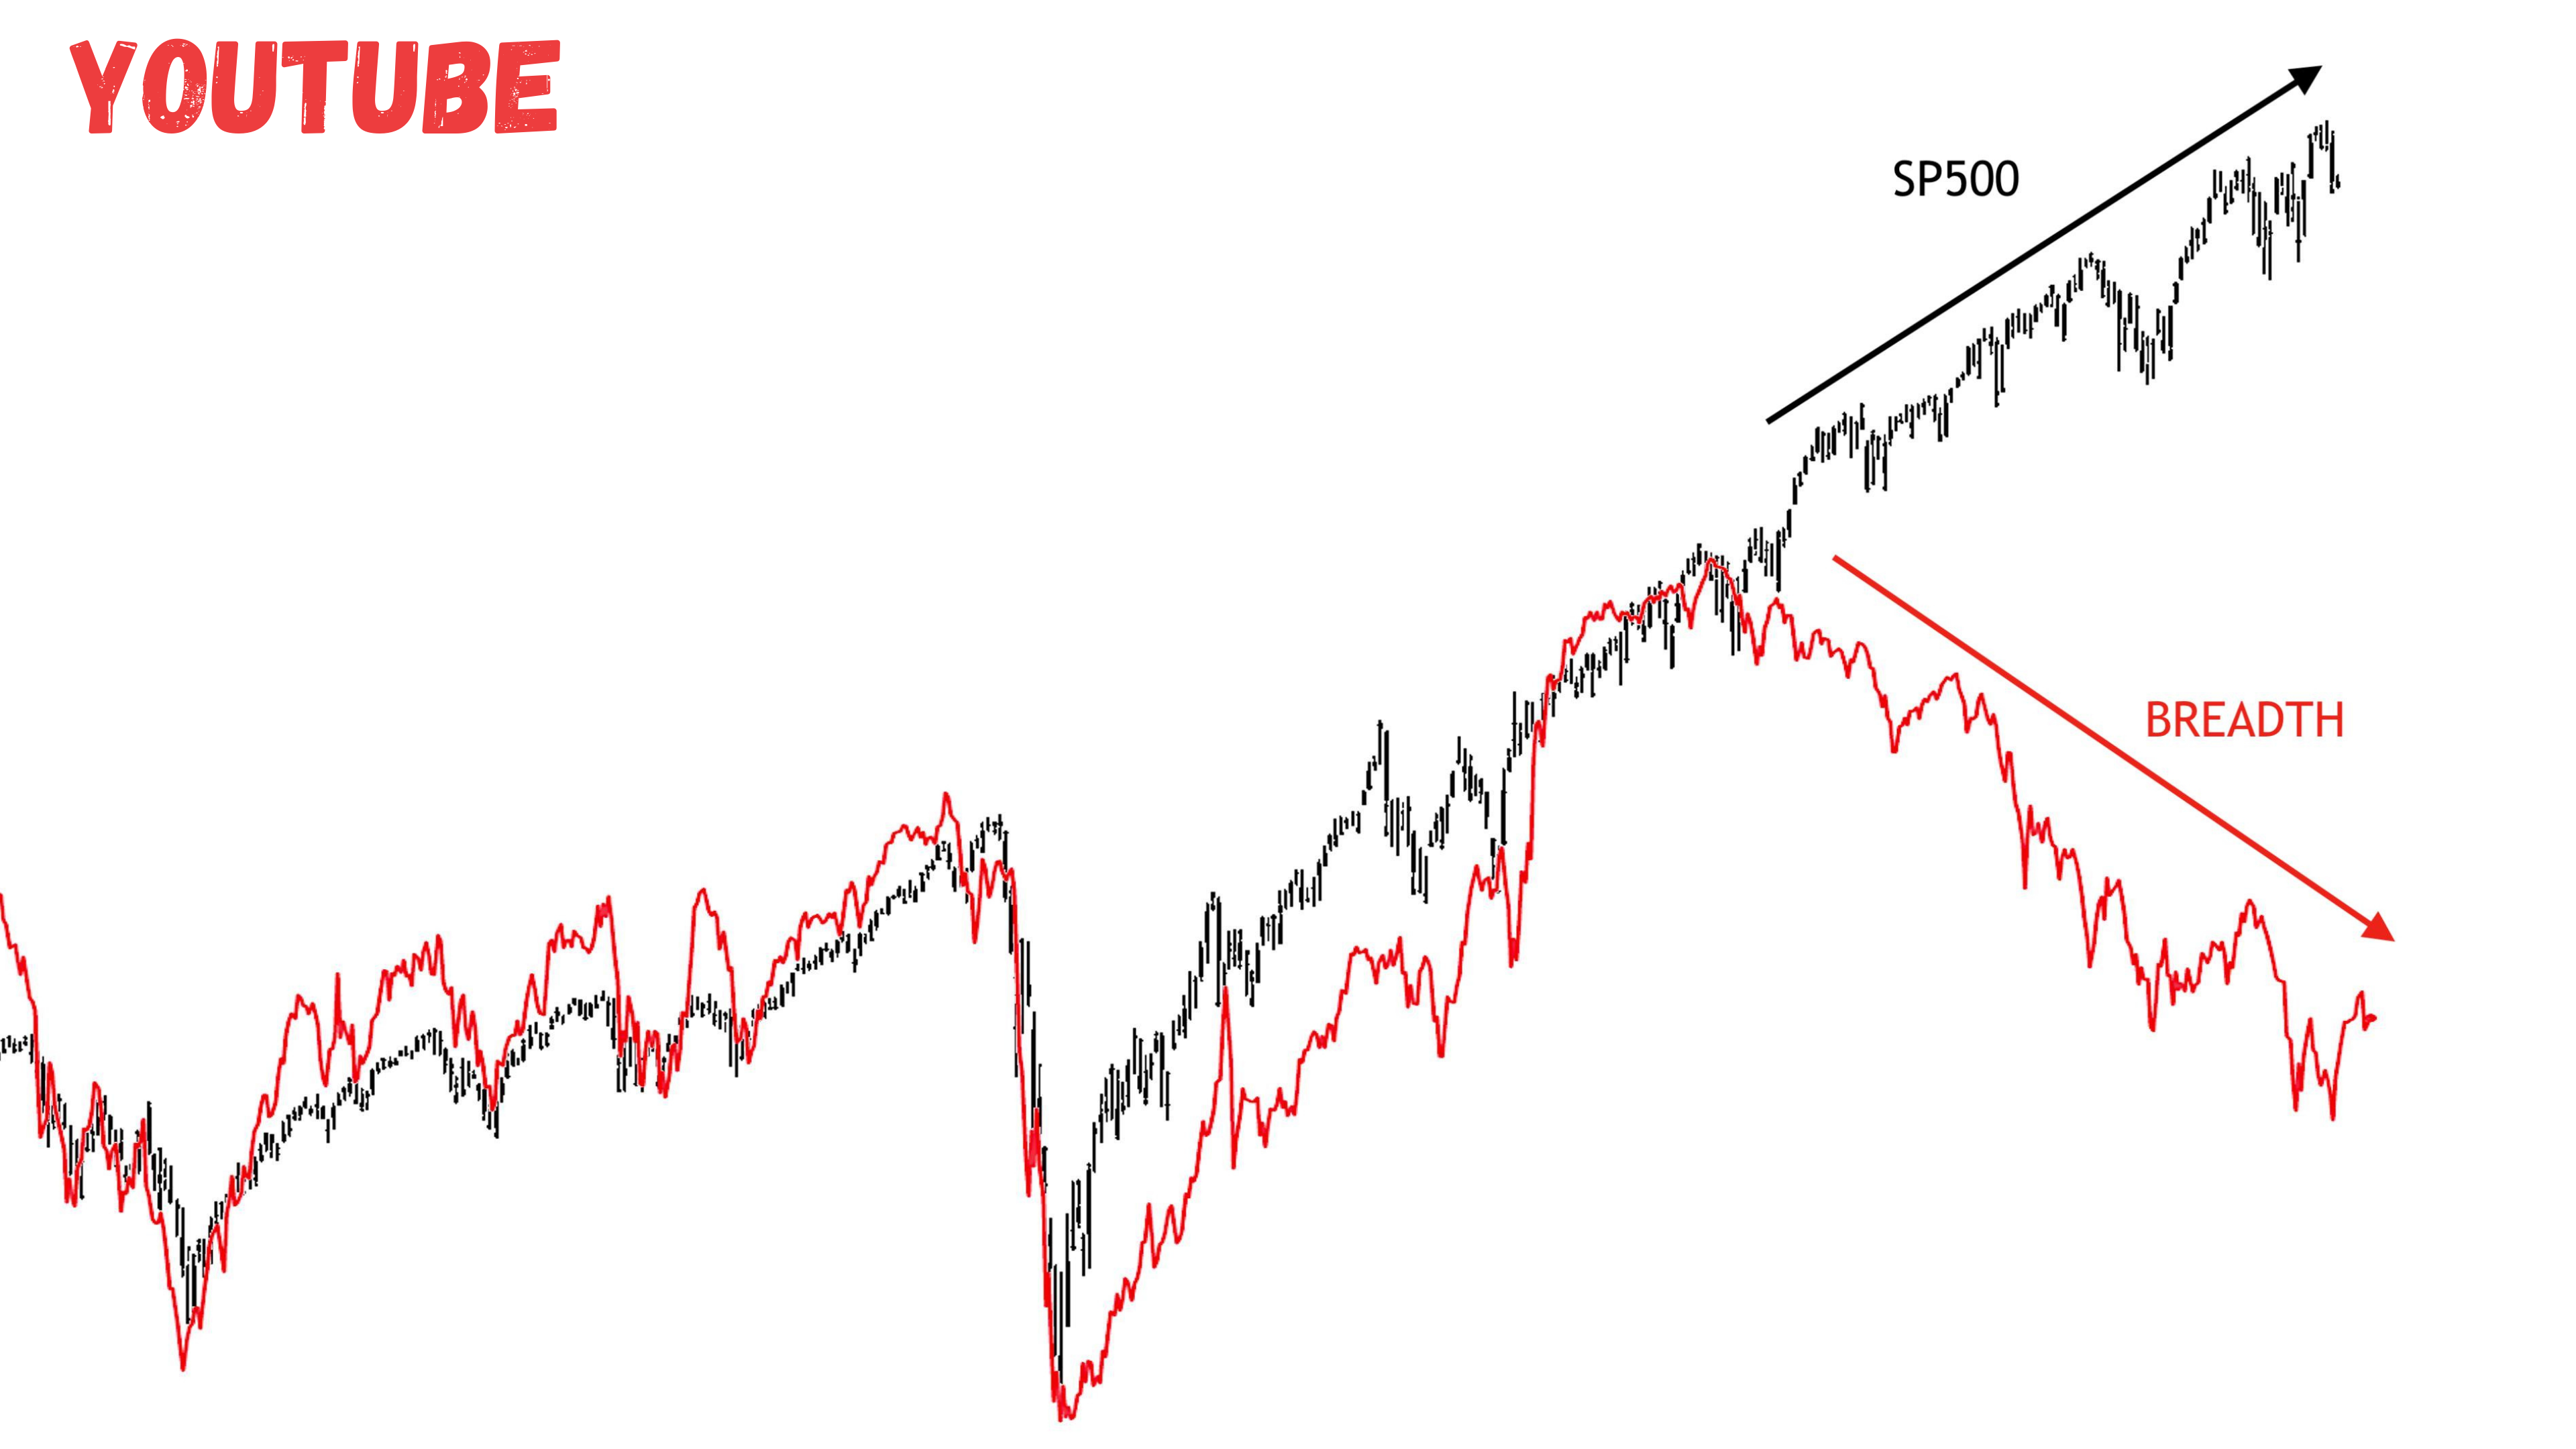 SP500 Breadth Deterioration | Tightening Narrative Could Provide the Fuel for a Correction